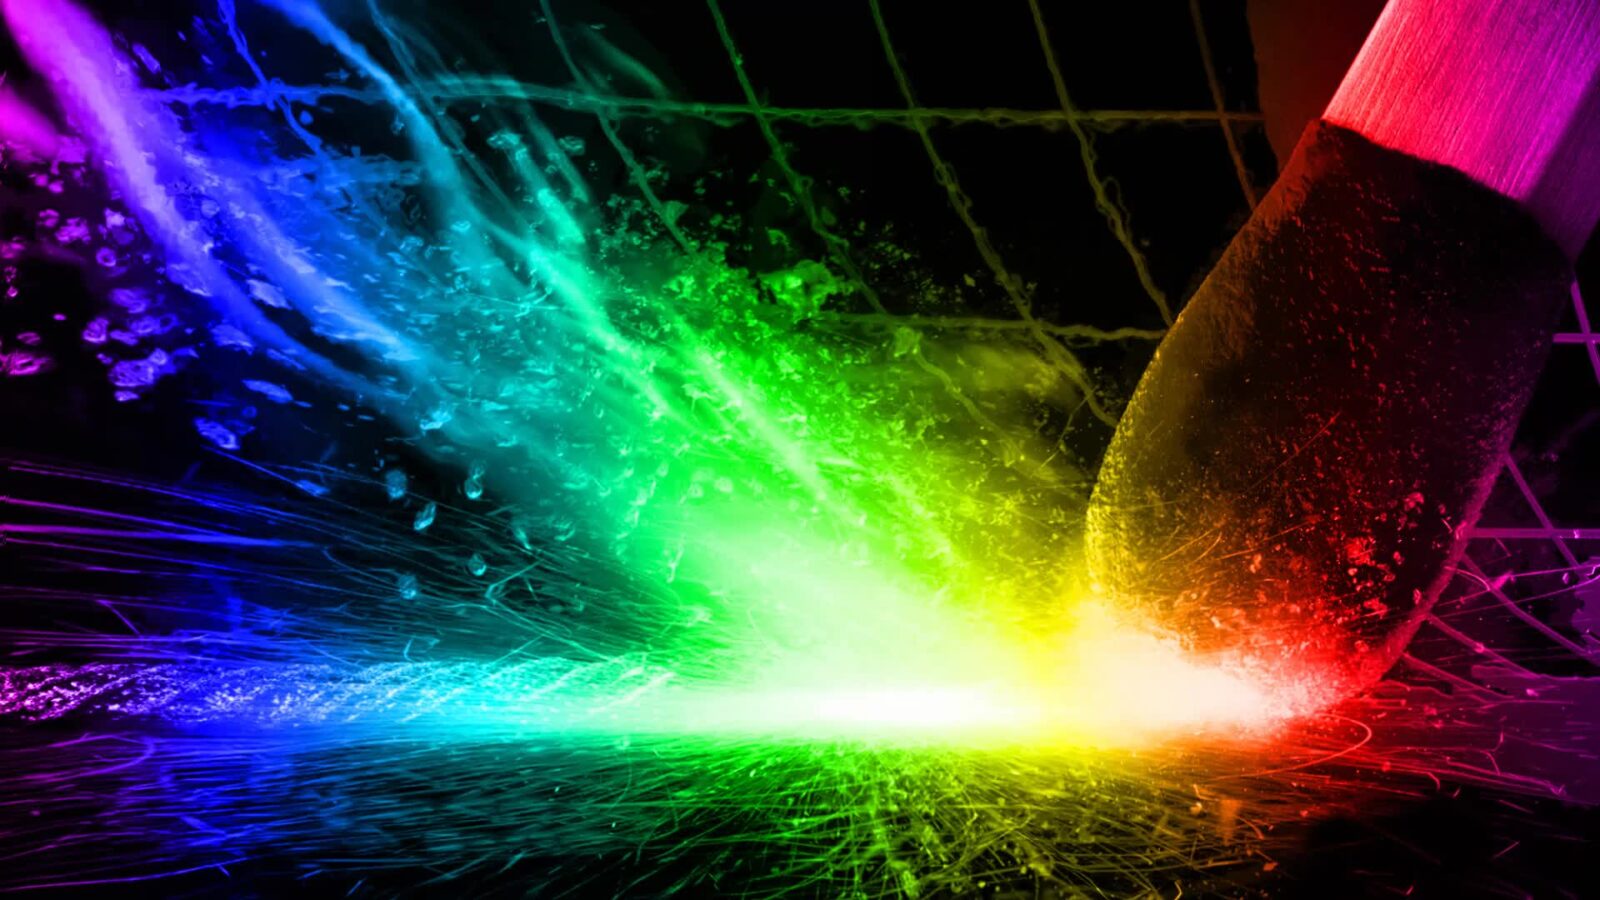 LiveWallpapers4Free.com | Colorful Matches Colorful Flame Abstract Artwork - Free Live Wallpaper